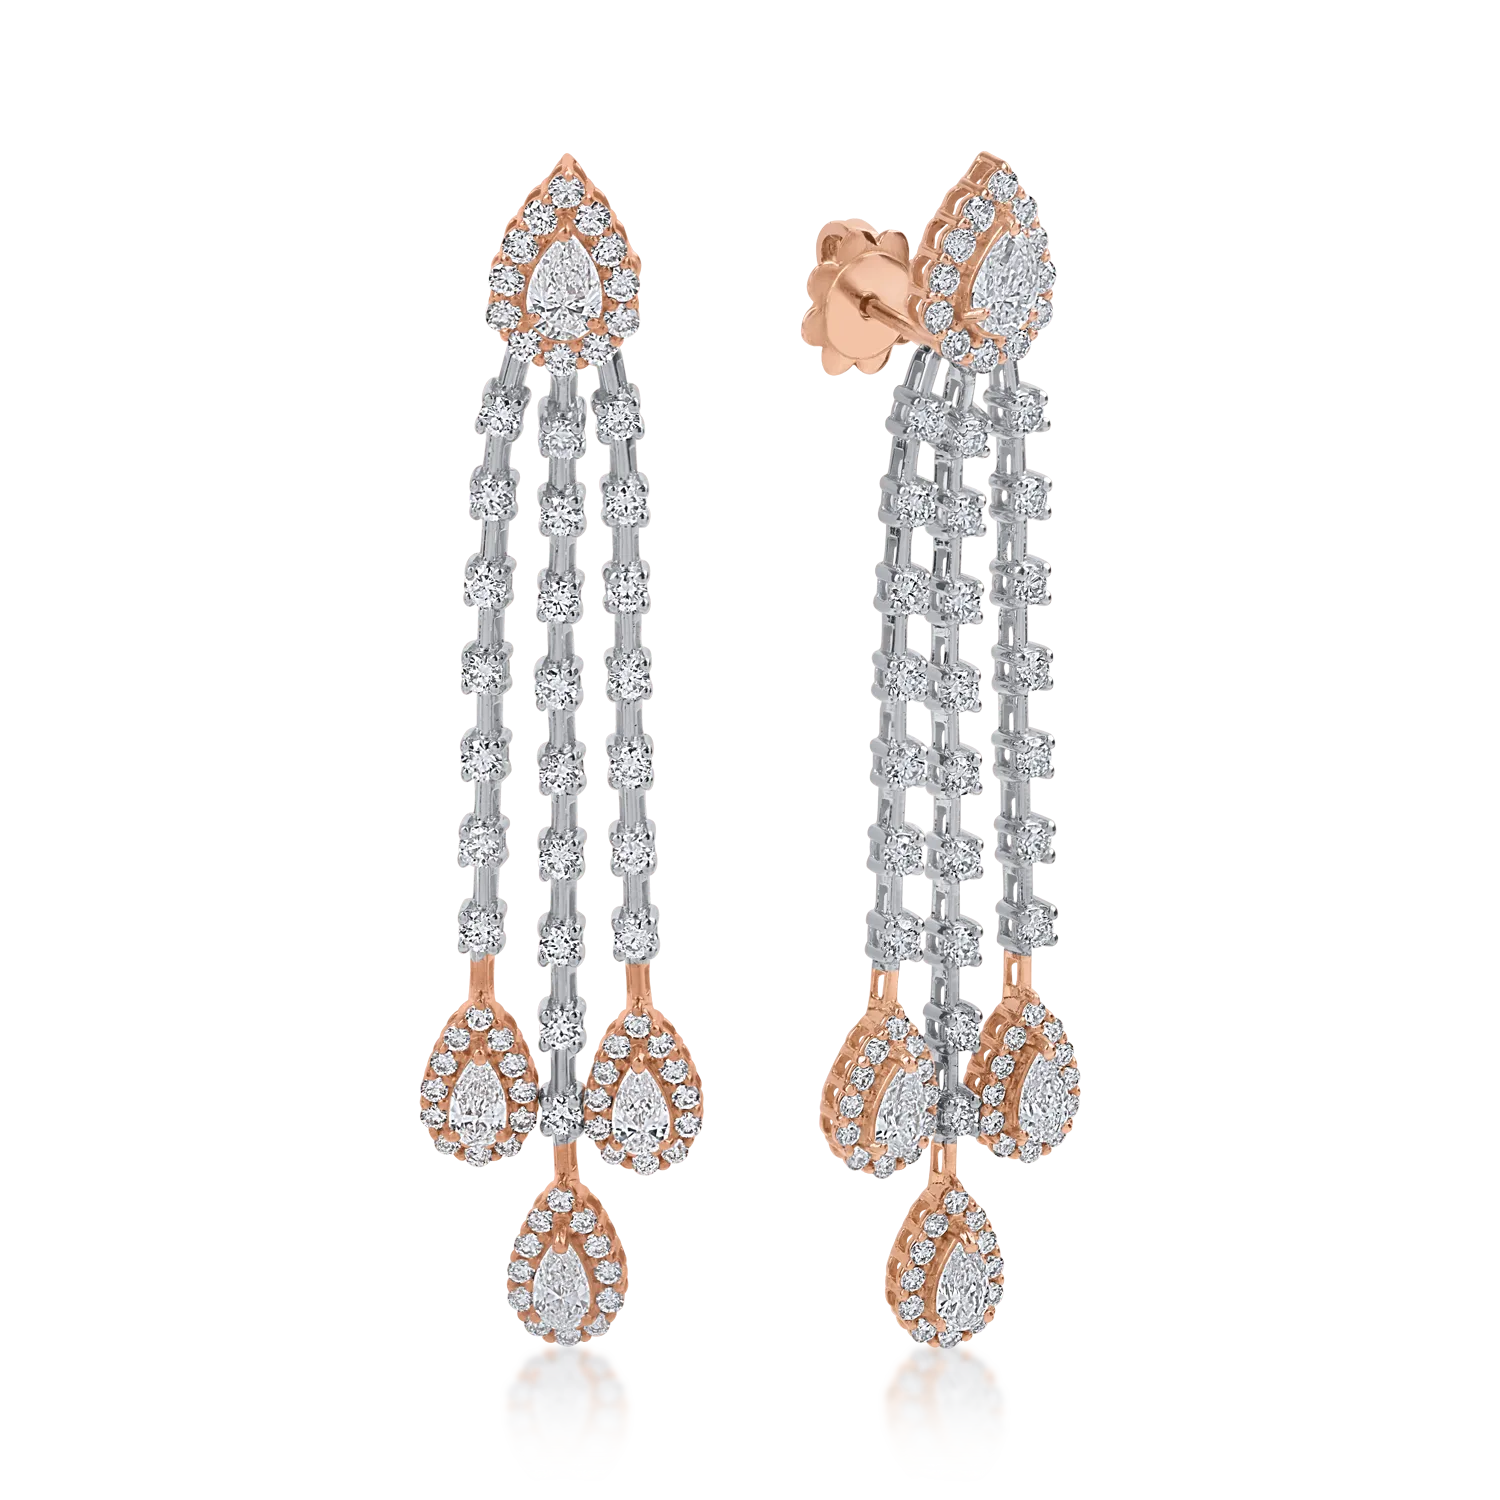 White-rose gold earrings with 2.851ct diamonds